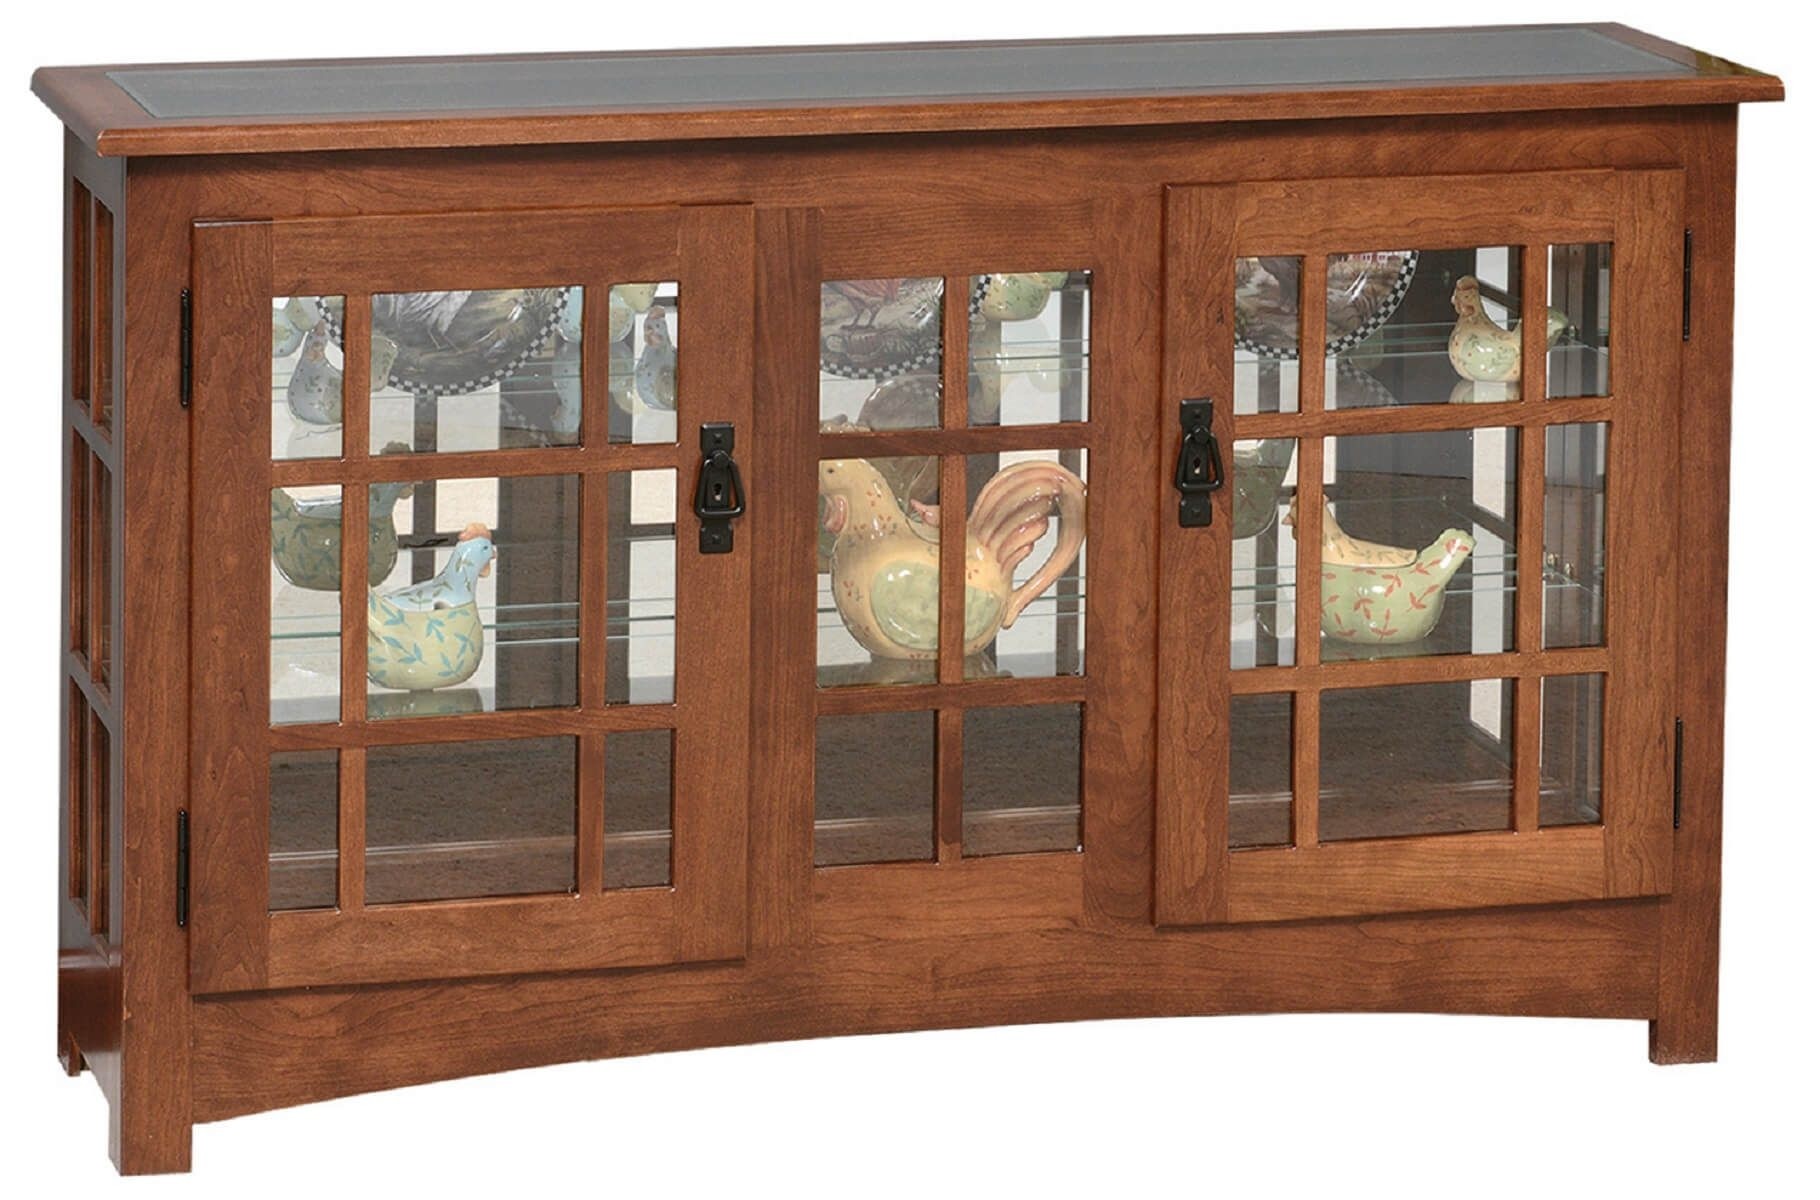 Newton large mission curio cabinet countryside amish